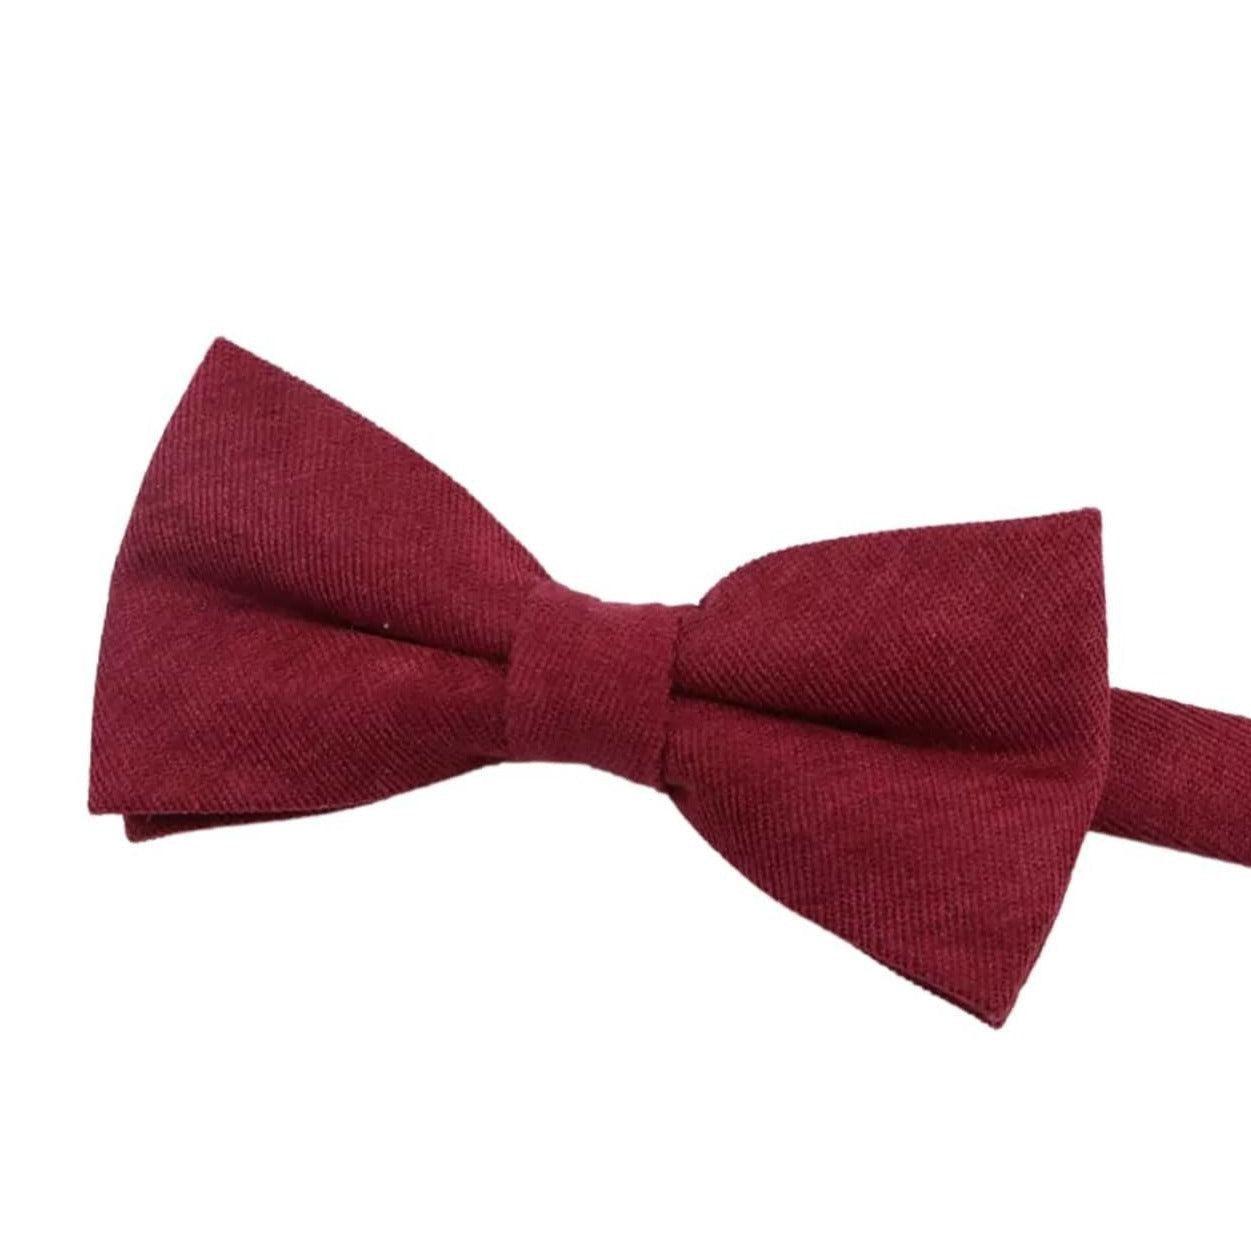 Red Bow Tie for Kids and baby’s Pre-Tied PHOENIX MYTIESHOP-Bow Tie 10.5 * 6CMfor toddlersColor: Red Wine Add some spunk to your little one's wardrobe with this PHOENIX Kids Red Floral Pre-Tied Bow Tie. Great for weddings, ring bearers, and other formal occasions, this bow tie will have your child looking dapper as can be. The red wine color is perfect for adding a pop of color, and the pre-tied design means that you won't have to worry about any tie-related mishaps. So let your child shine brigh